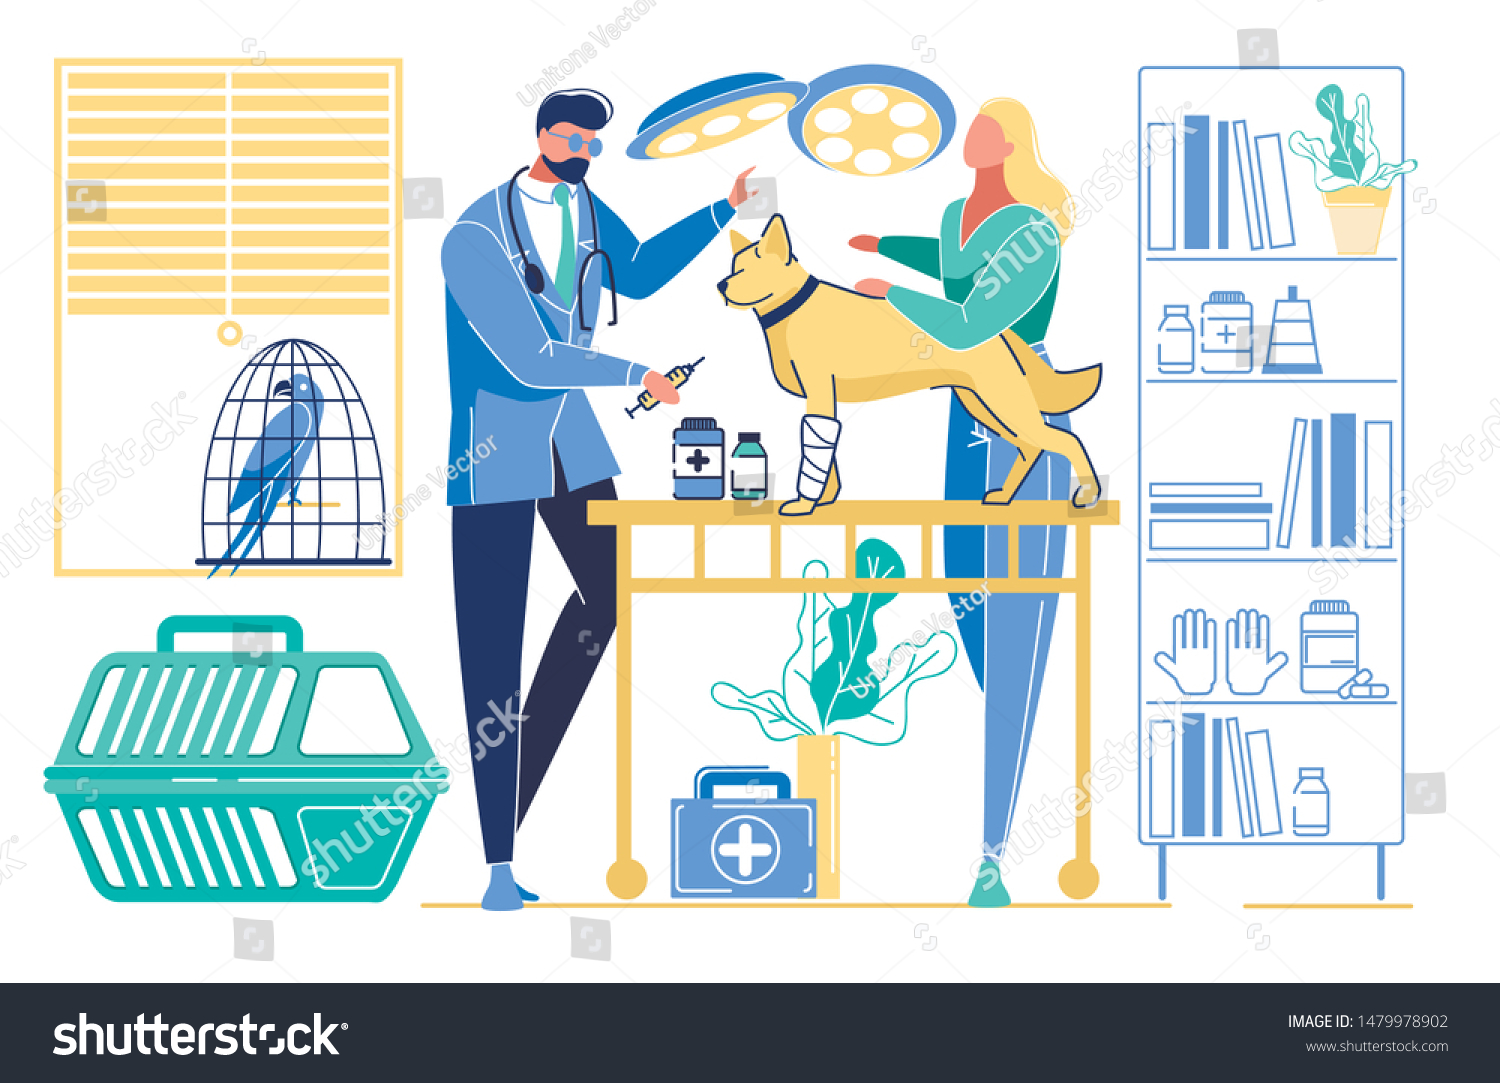 SVG of Woman Owner Bring Dog with Broken Paw at Veterinary Clinic for Treatment. Veterinarian Doctor Put Injection to Animal in Cabinet with Medical Equipment, Health Care. Cartoon Flat Vector Illustration svg